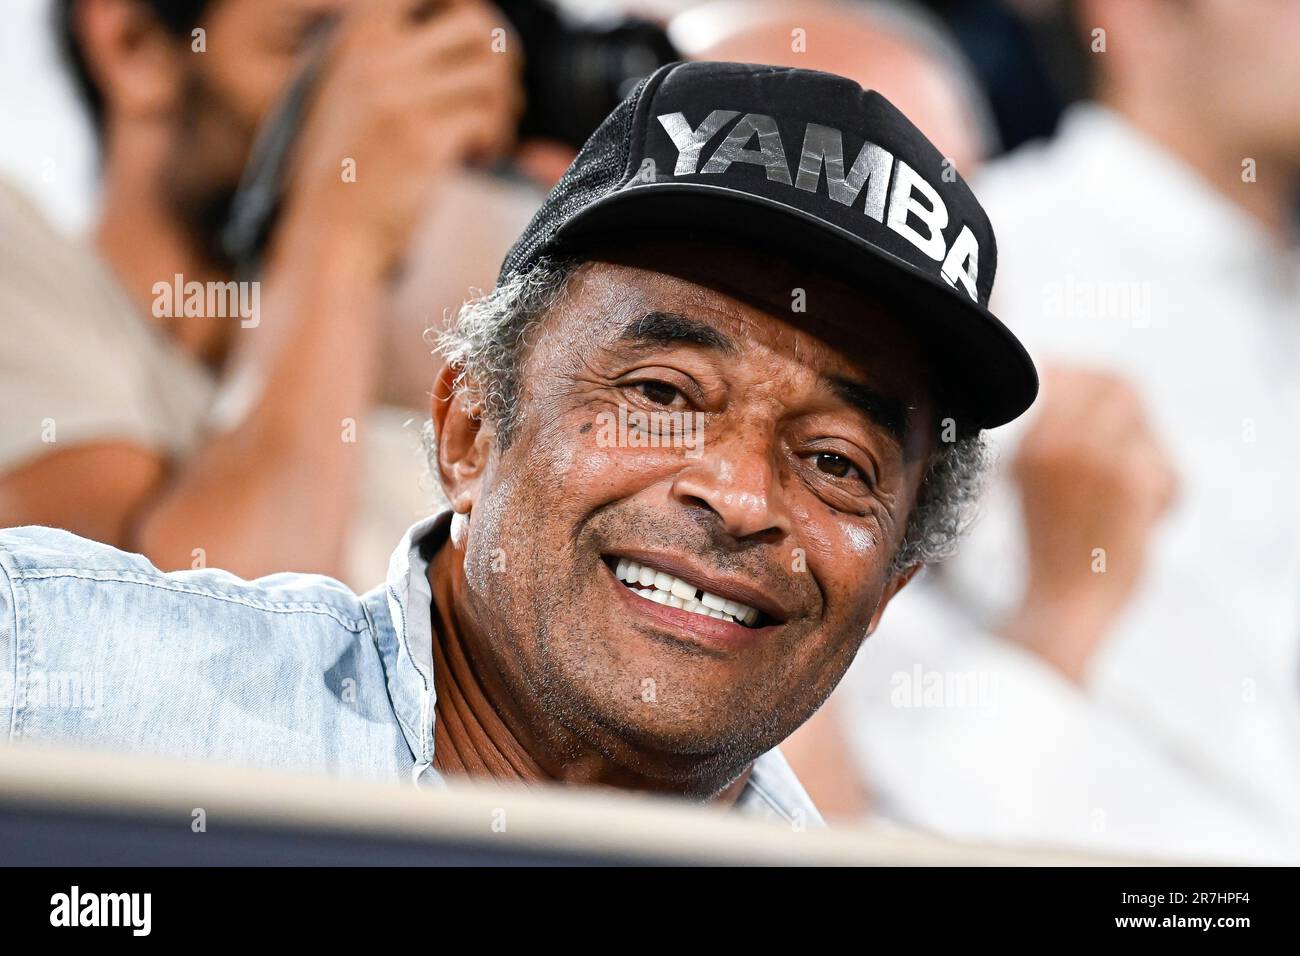 Paris, France. 15th June, 2023. Yannick Noah during the Betclic elite  basketball match (final) between AS Monaco (ASM) and Metropolitans 92 (Mets  or Boulogne-Levallois) at Roland Garros on June 15, 2023 in